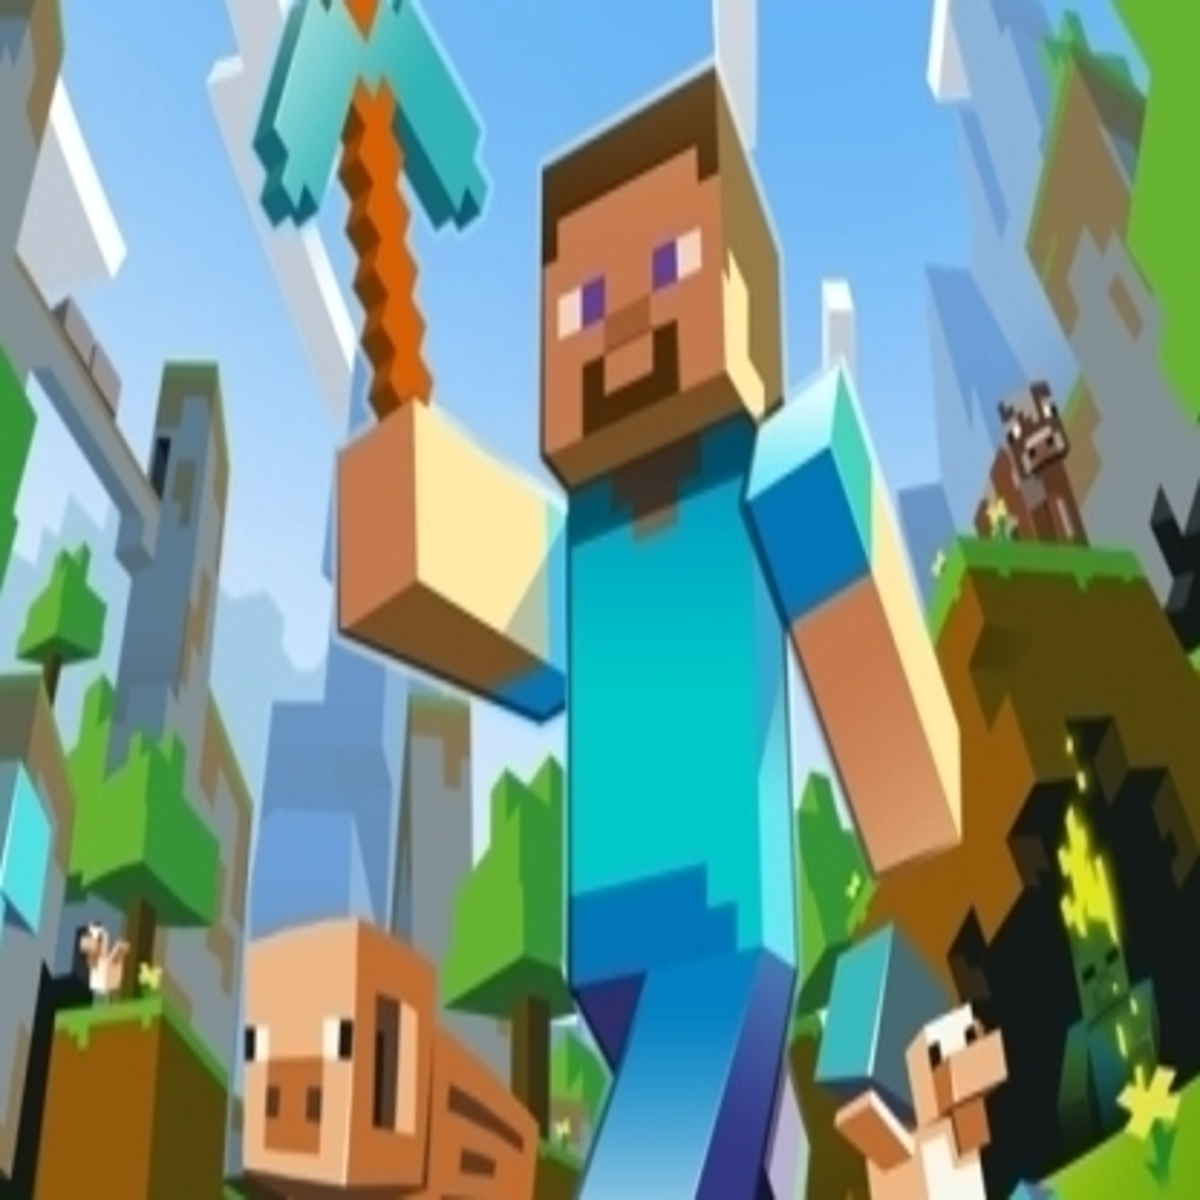 Minecraft tops 's list of most watched games of 2020